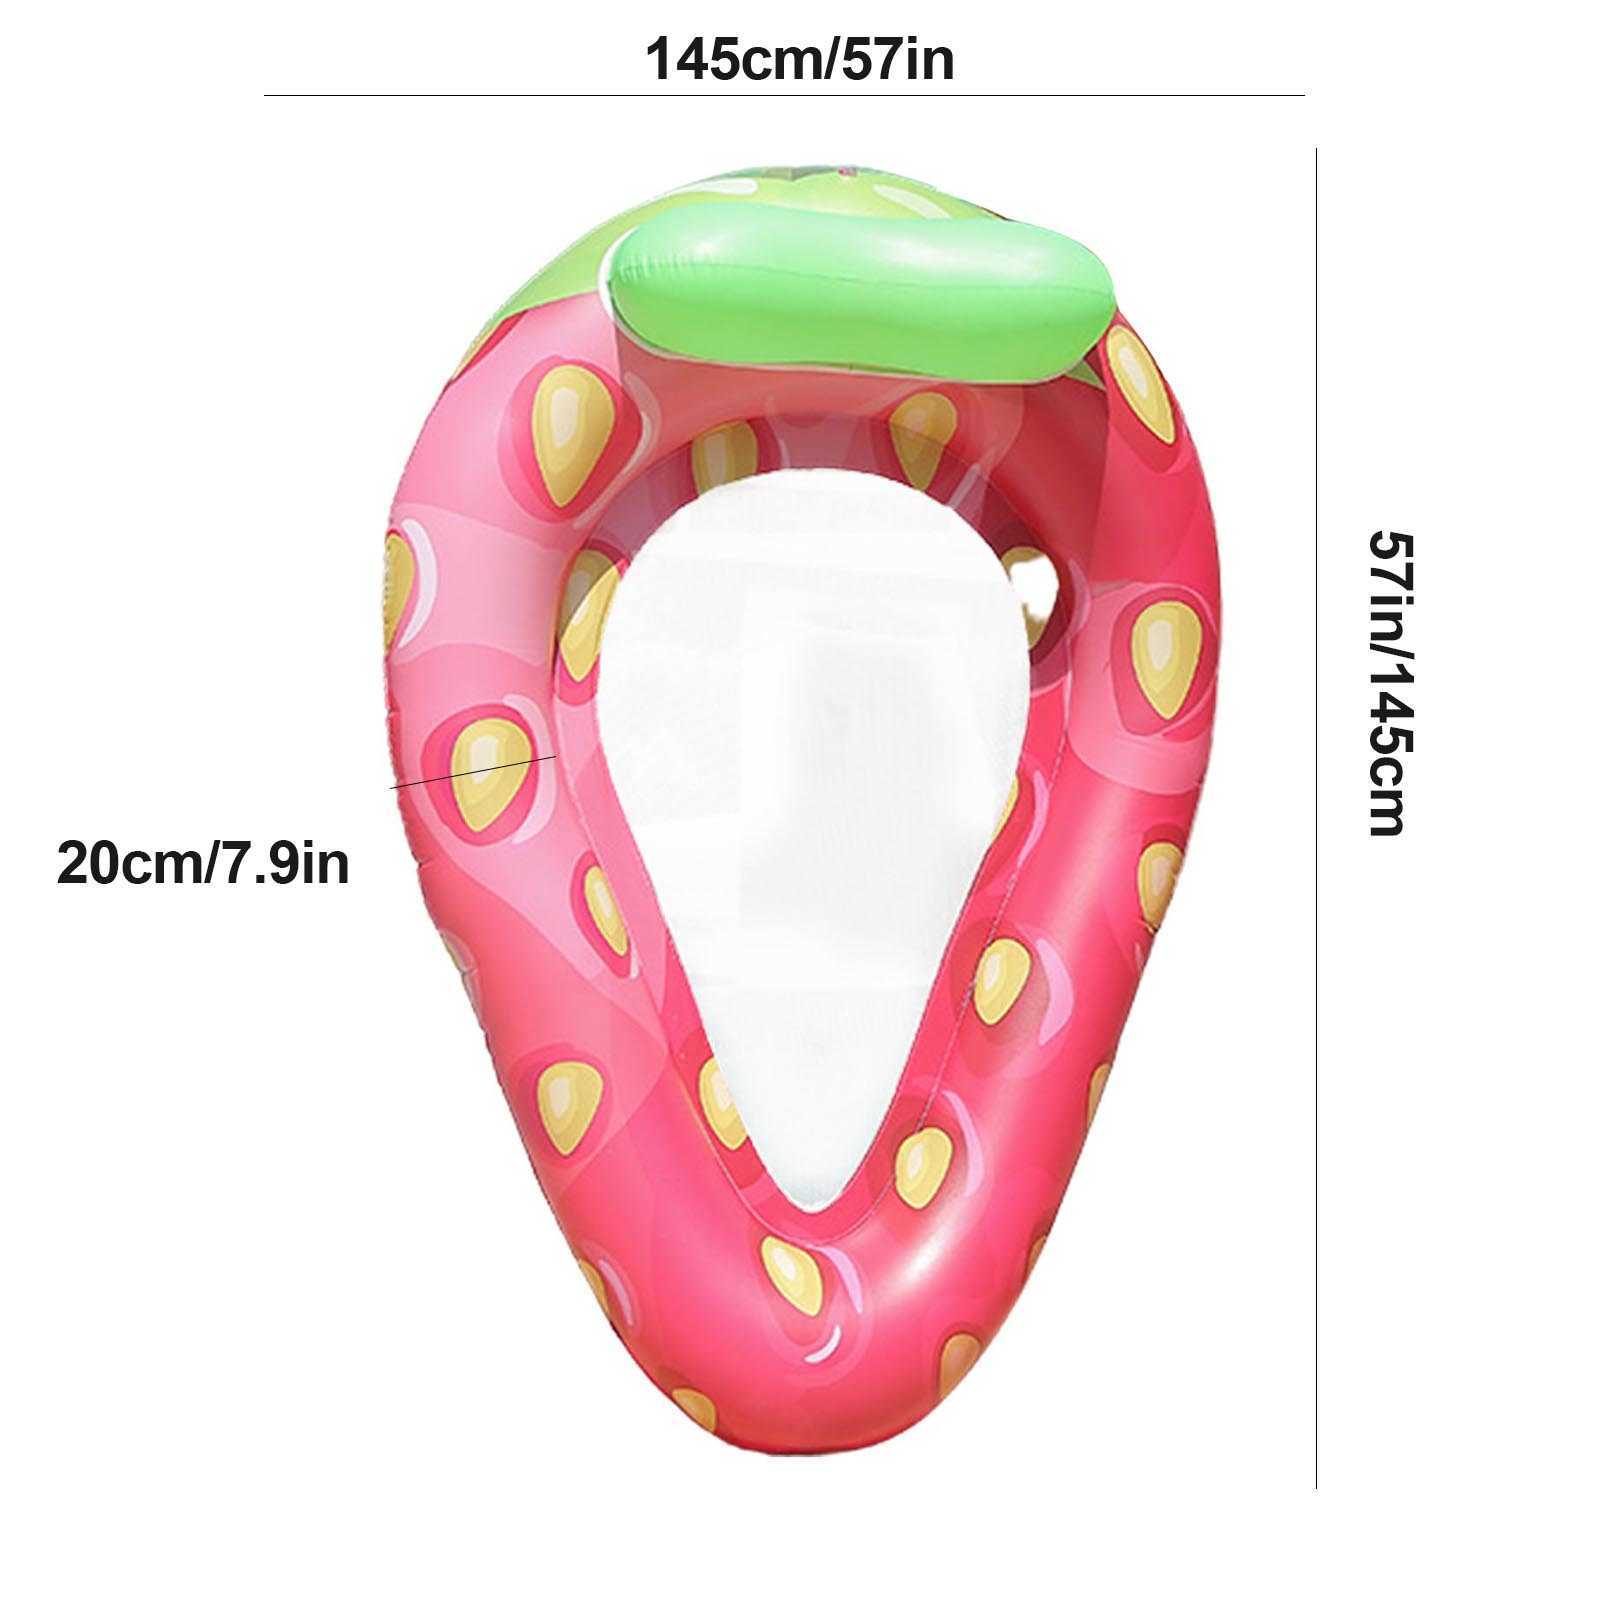 Life Vest Buoy Inflatable Floating Row Strawberry Pool Float Summer PVC Water Hammock Beach Pool Float Lounger Chair Beach Party Toys T221214